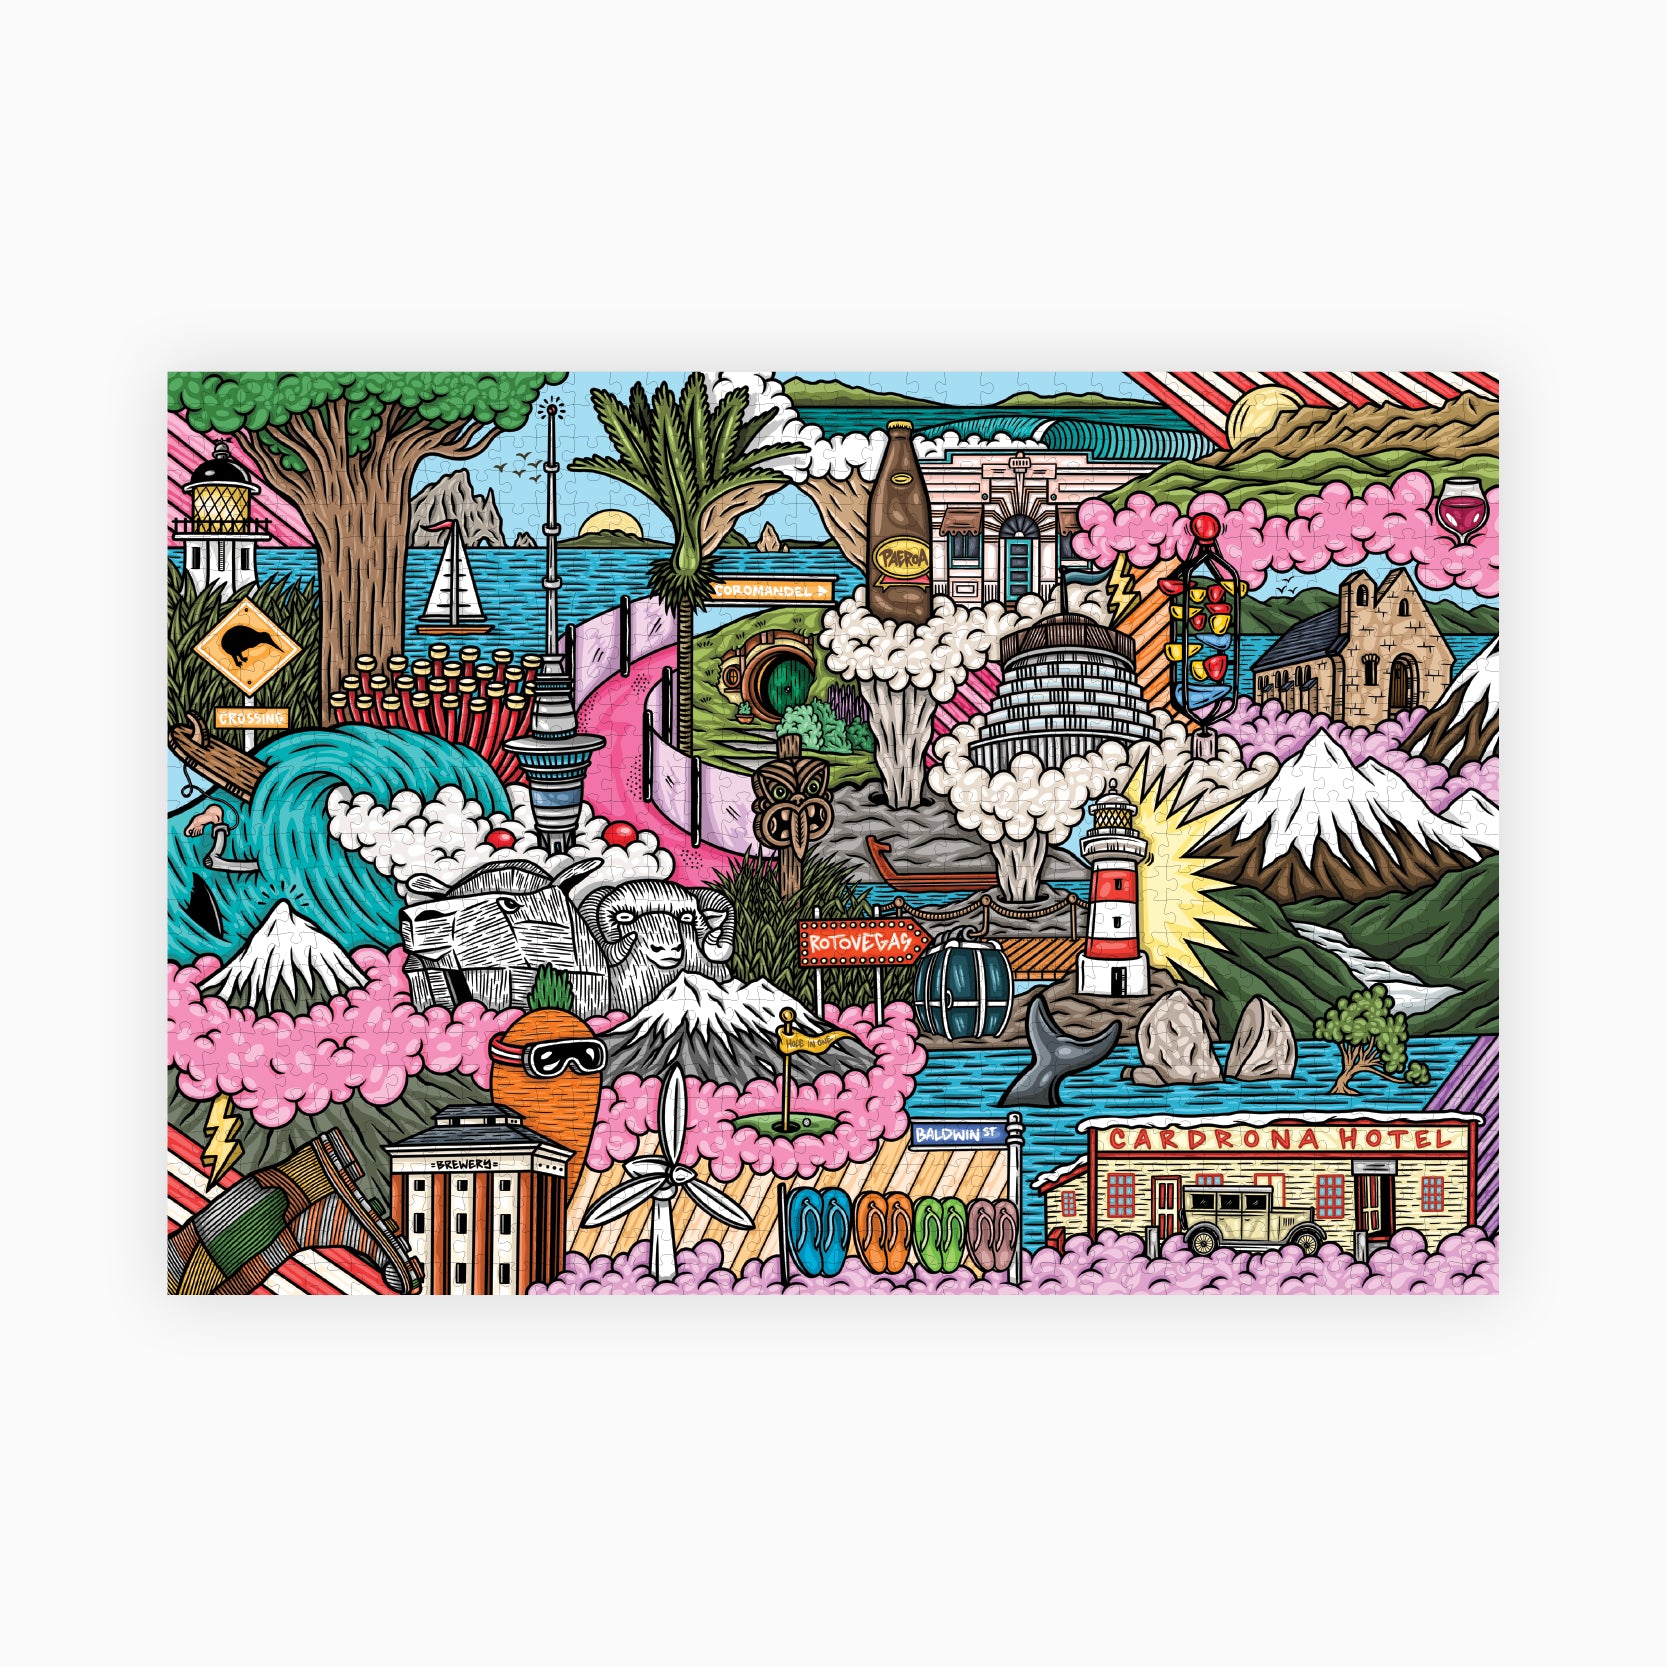 New Zealand Kiwiana Jigsaw Puzzle. Iconic landmarks of NZ. Fun, colourful 1,000 piece puzzle. A great gift idea for friends and family.